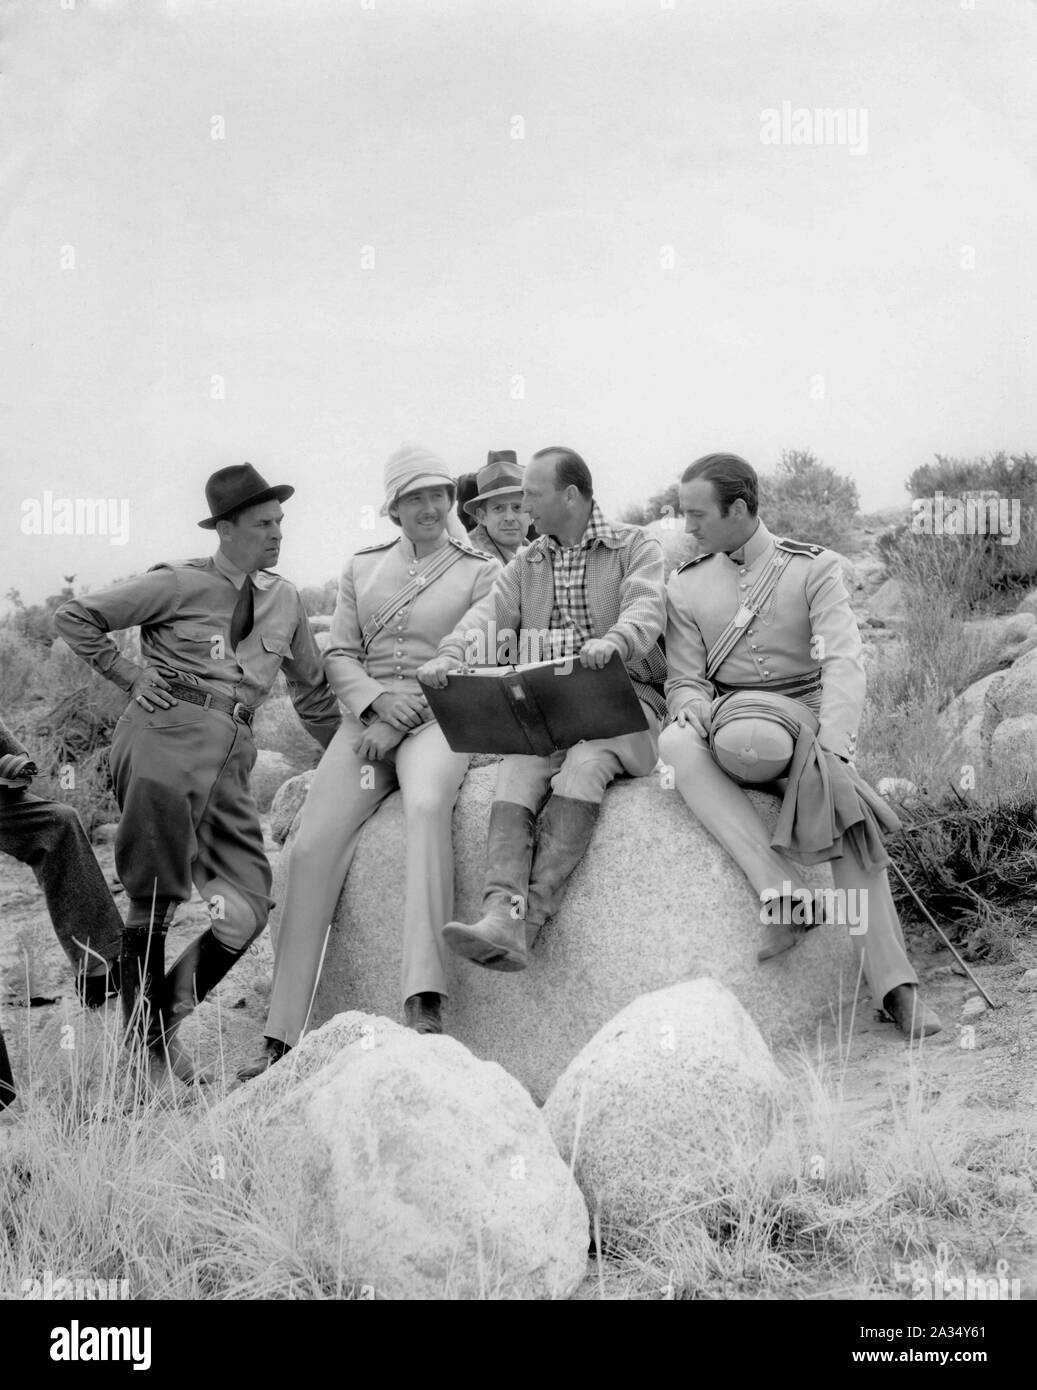 Assistant Director JACK SULLIVAN ERROL FLYNN as Major Geoffrey Vickers director MICHAEL CURTIZ and DAVID NIVEN as Captain Randall on set location candid filming THE CHARGE OF THE LIGHT BRIGADE 1936 director MICHAEL CURTIZ poem Alfred Lord Tennyson music Max Steiner Warner Bros. Stock Photo